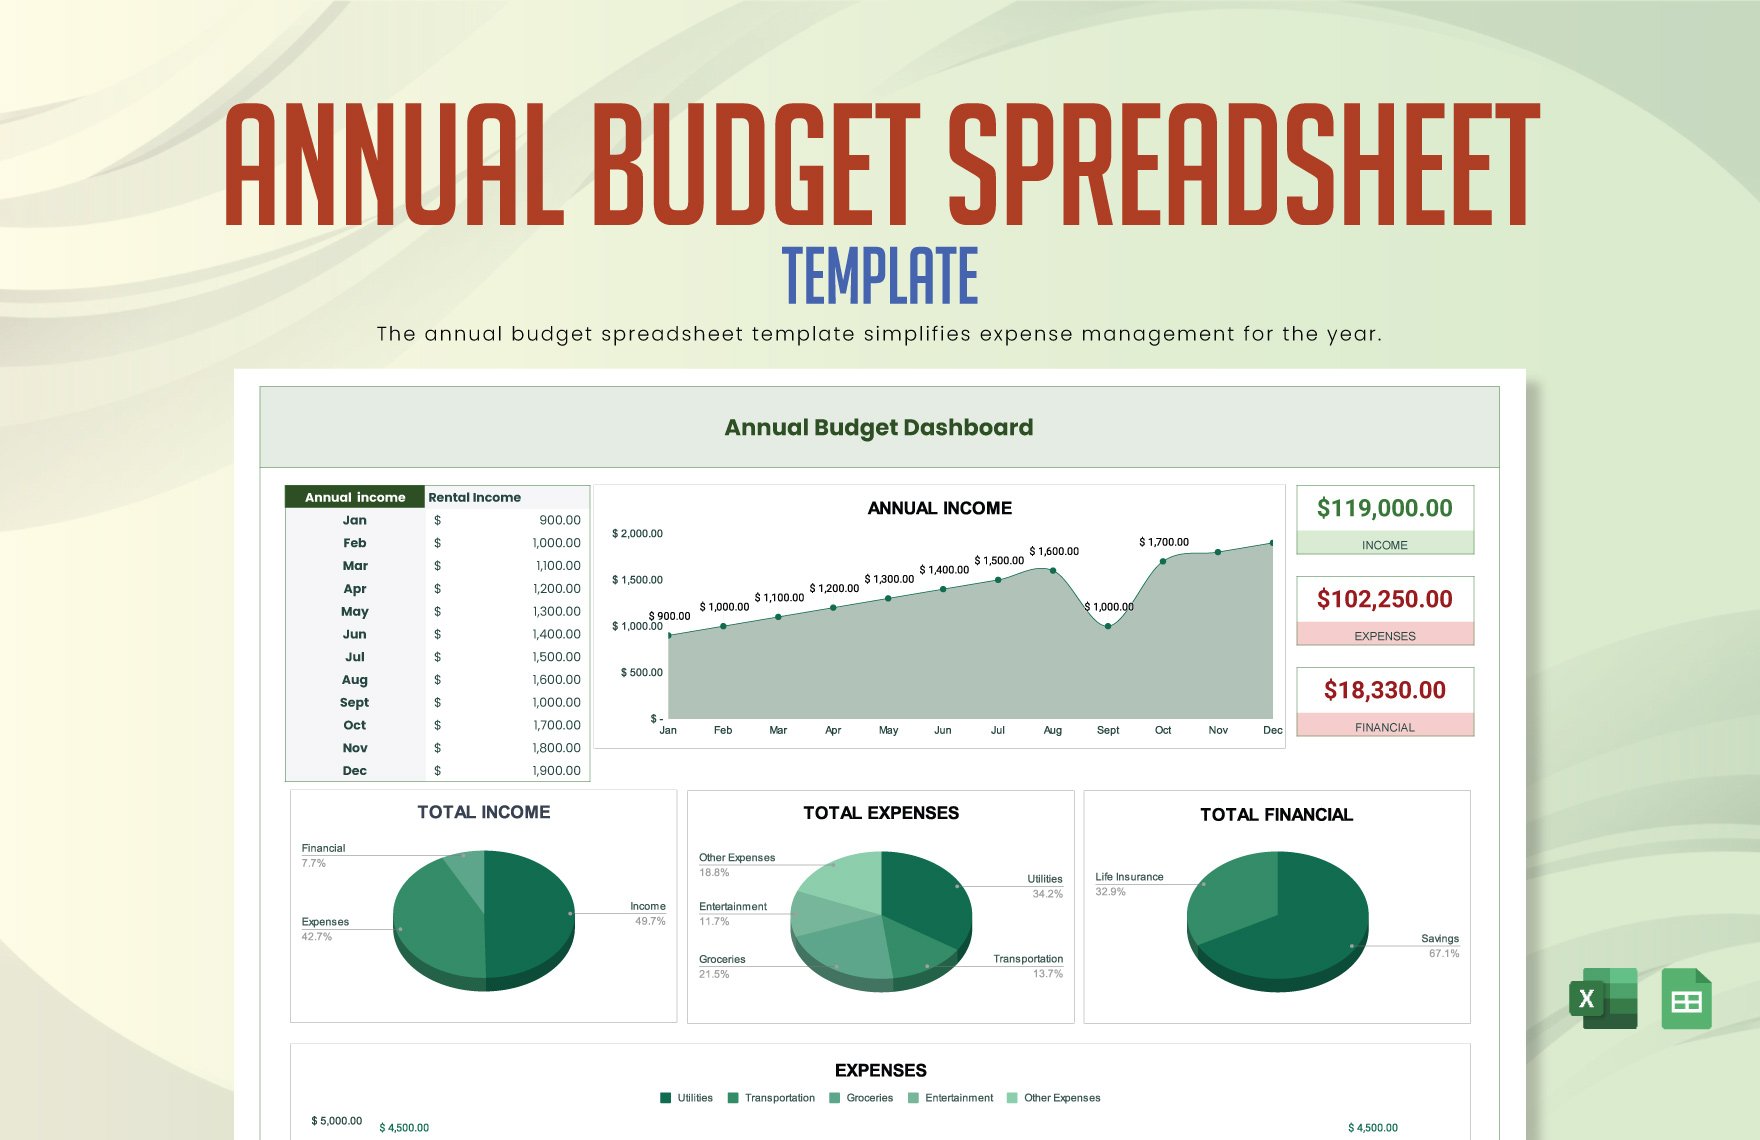 Annual Budget Spreadsheet Template in Excel, Google Sheets